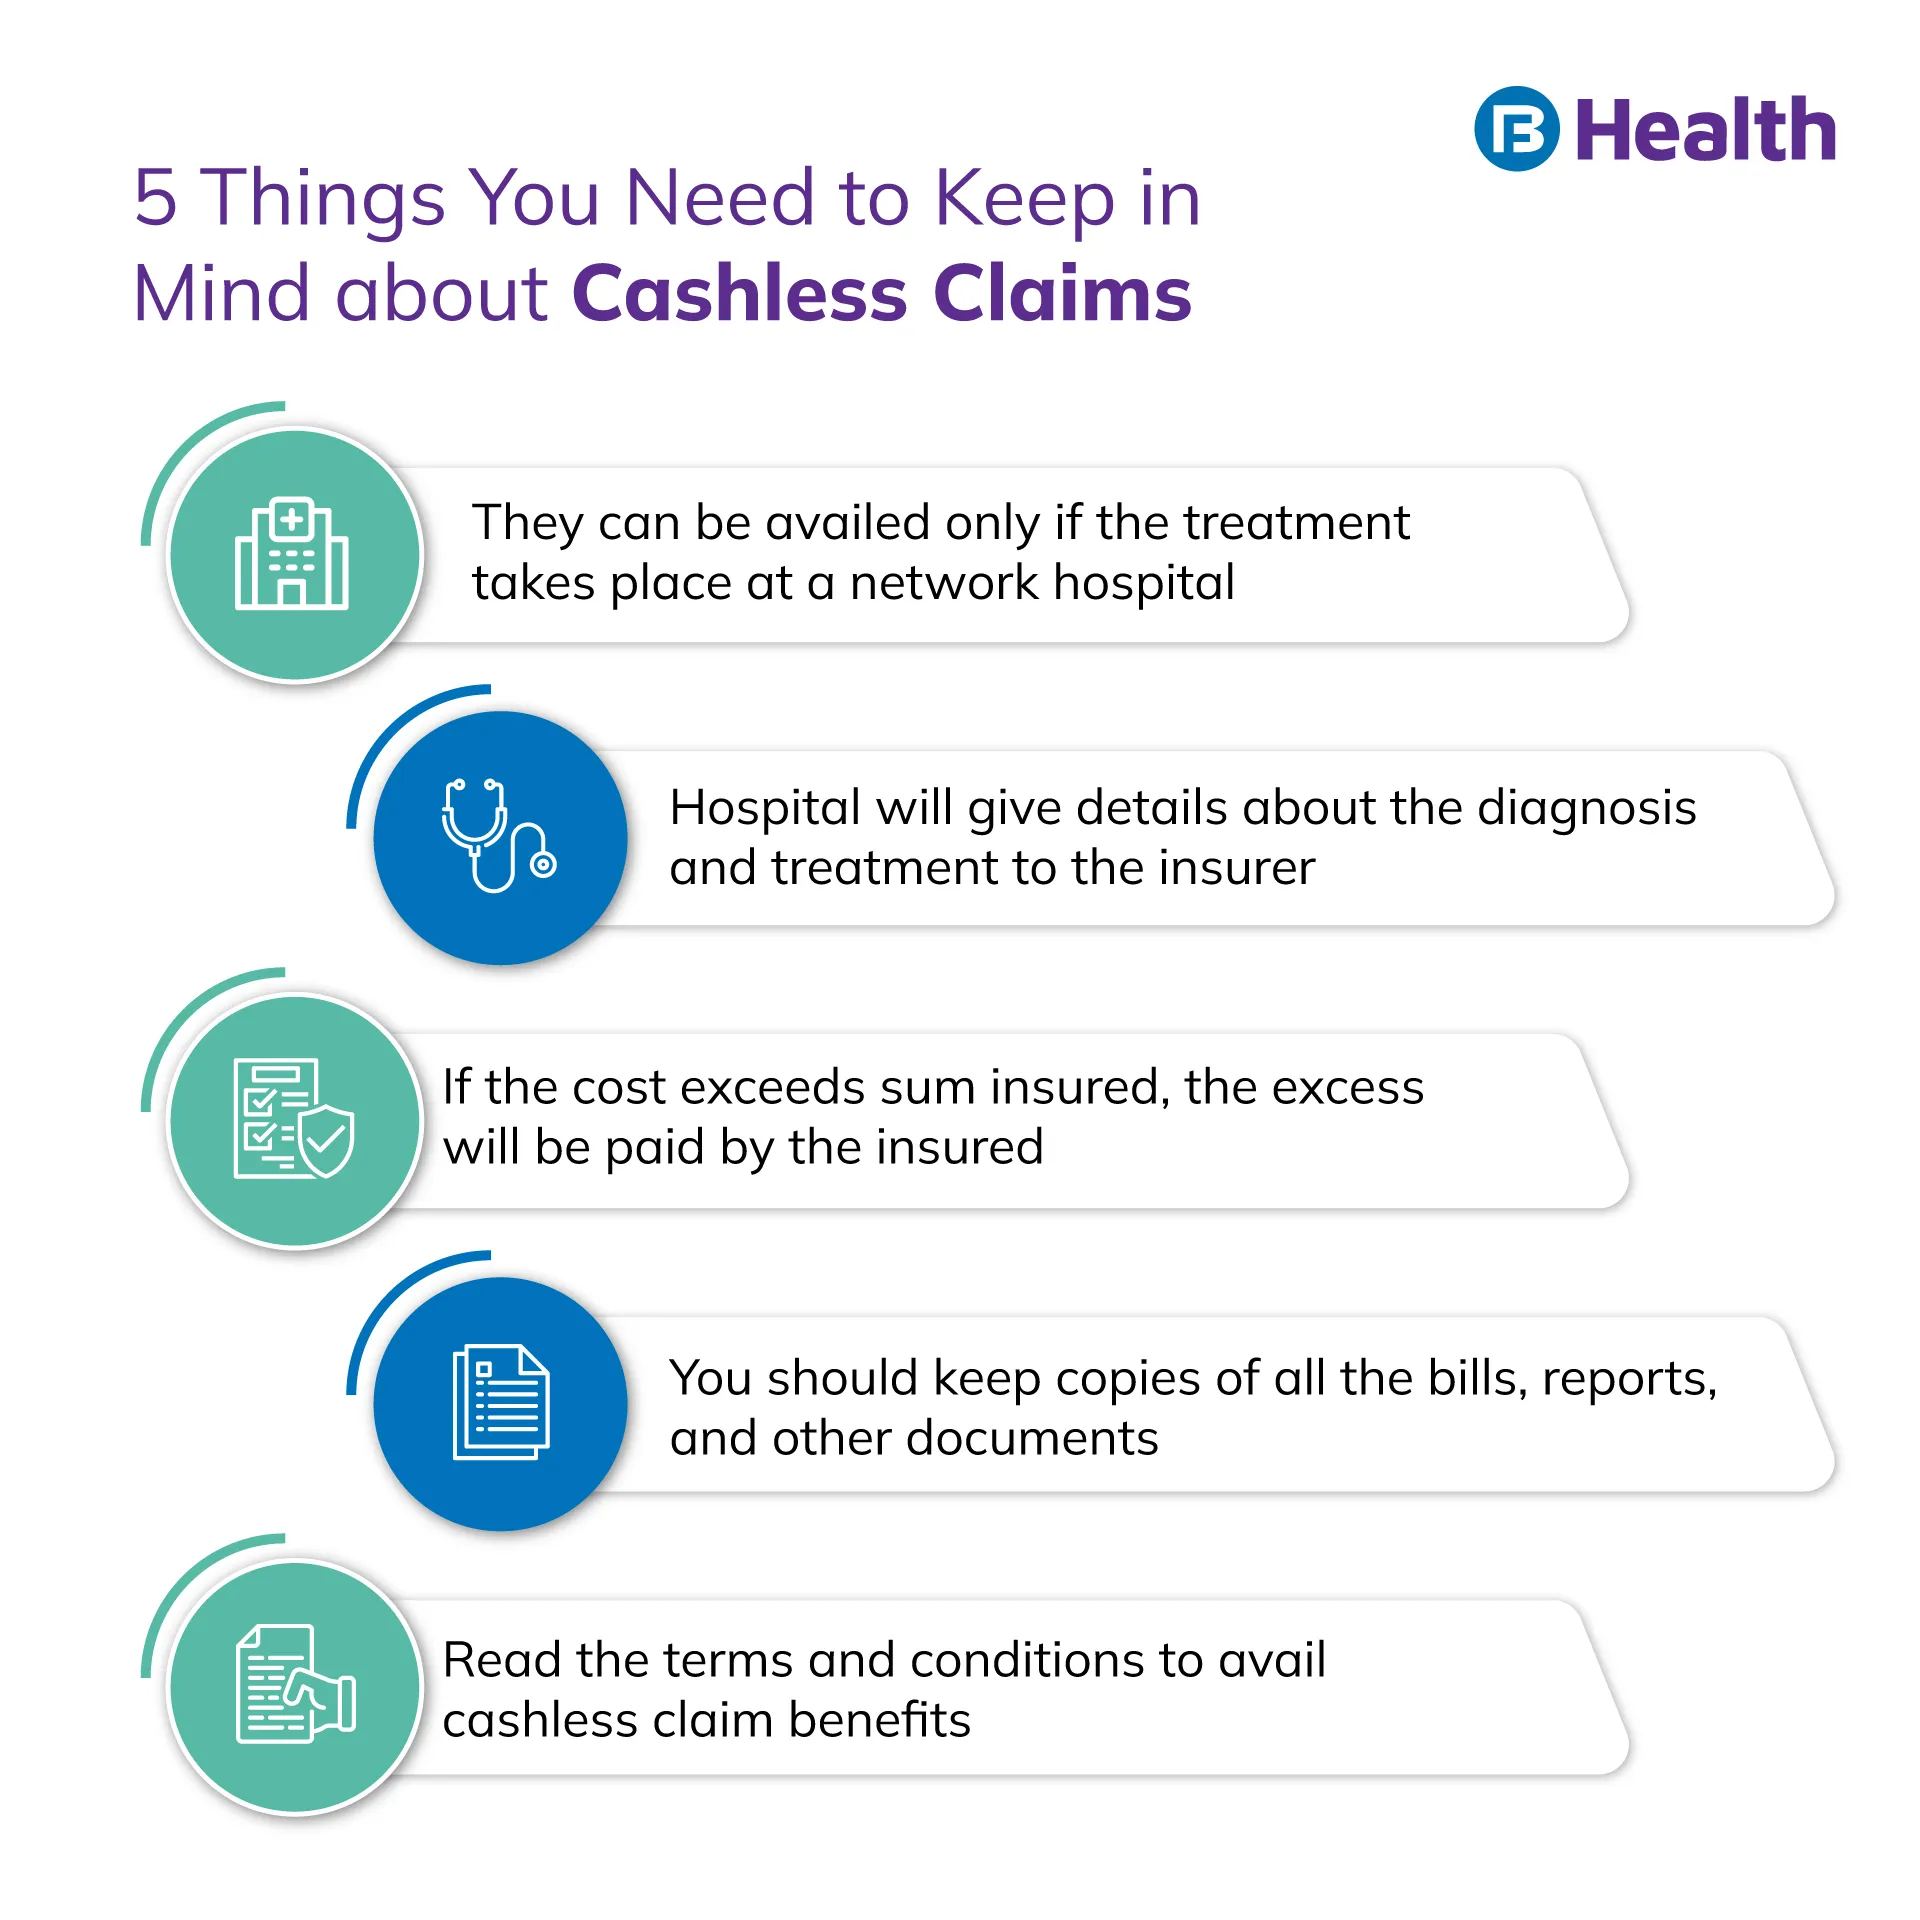 important thing about Cashless Claim